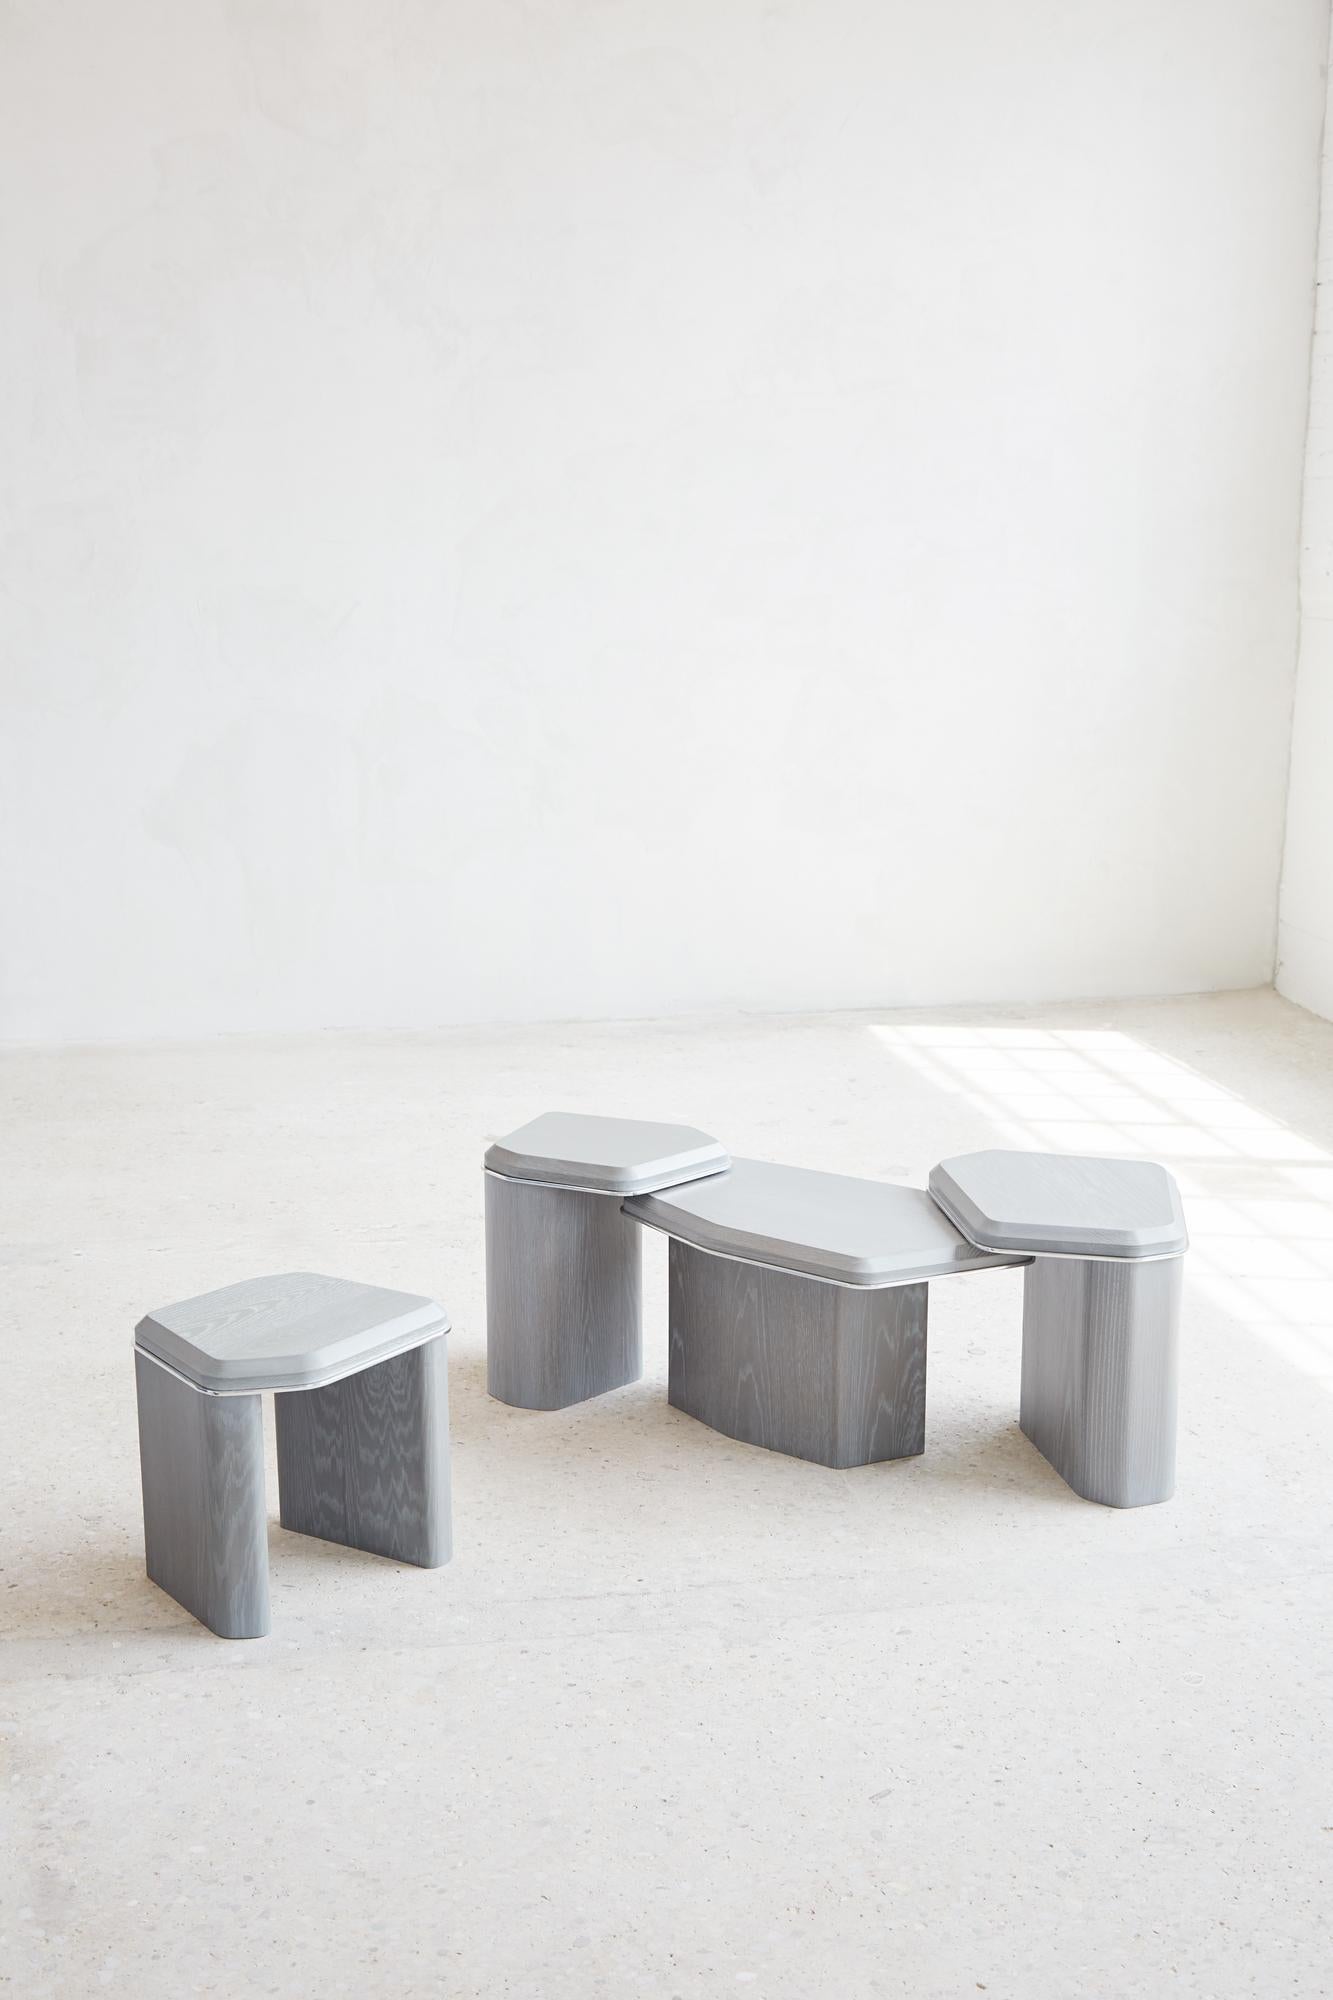 GEOMORPH NESTING TRIO
A sister product to the Console Table, the Geomorph Side Tables are inspired by the iconic metamorphic rock formations of the Canadian Shield and fabricated with oak and aluminum. Their shapes have a geometric but rounded